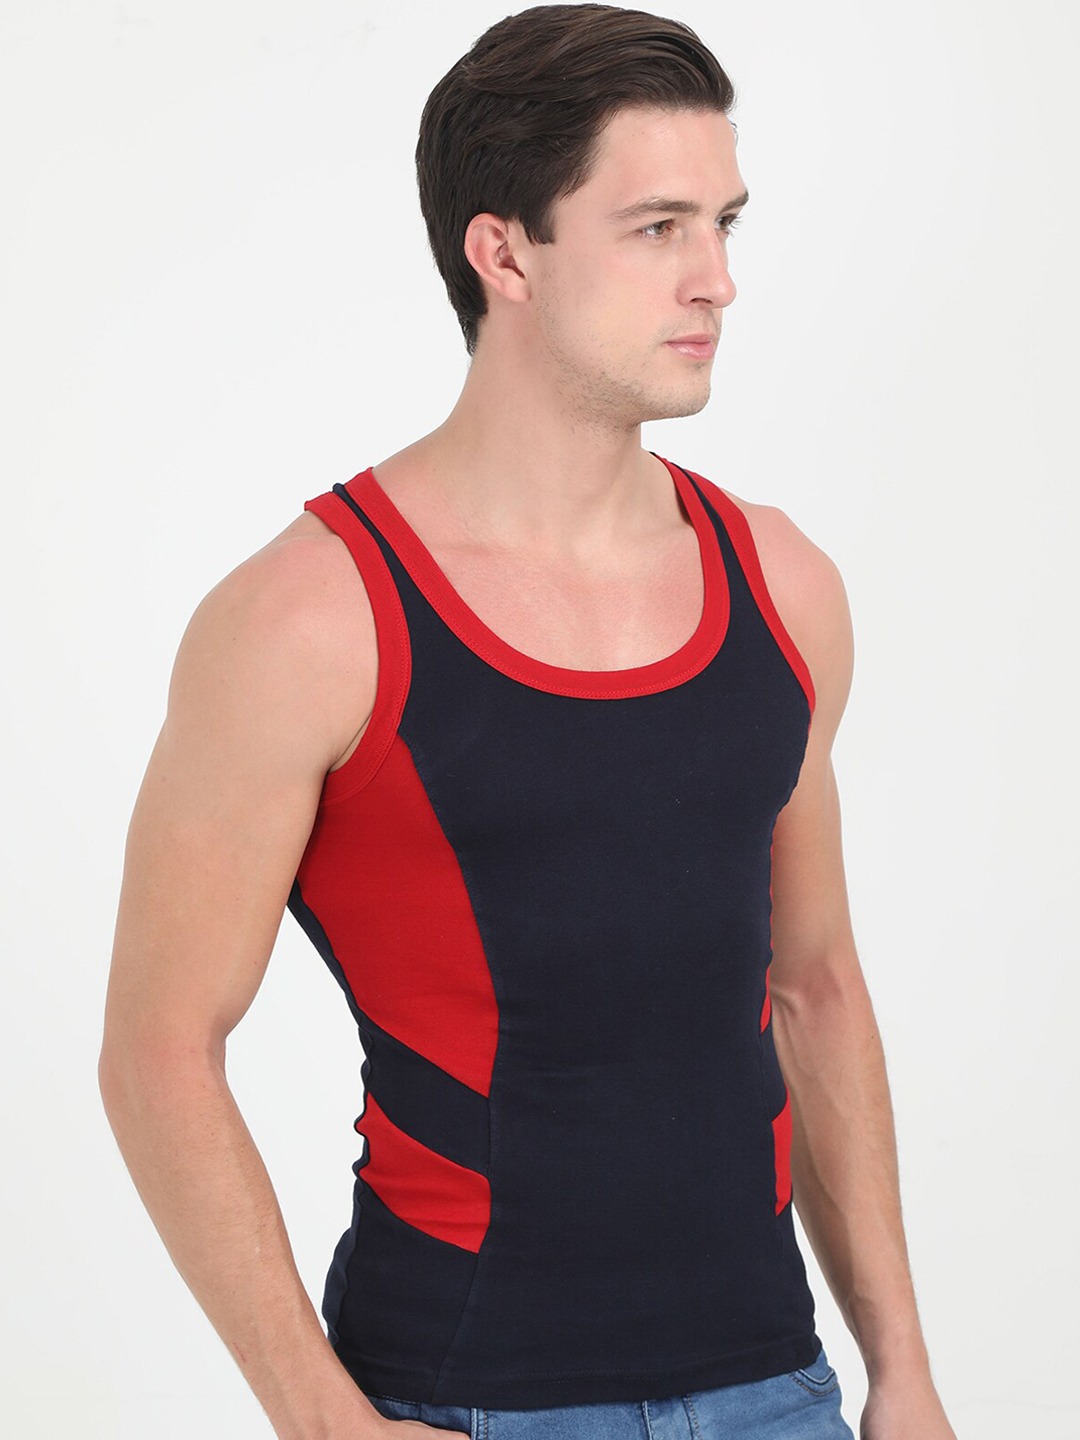 Clothing Innerwear Vests | Genx Men Assorted Pack of 4 Colourblocked Cotton Gym Vests - QD06157